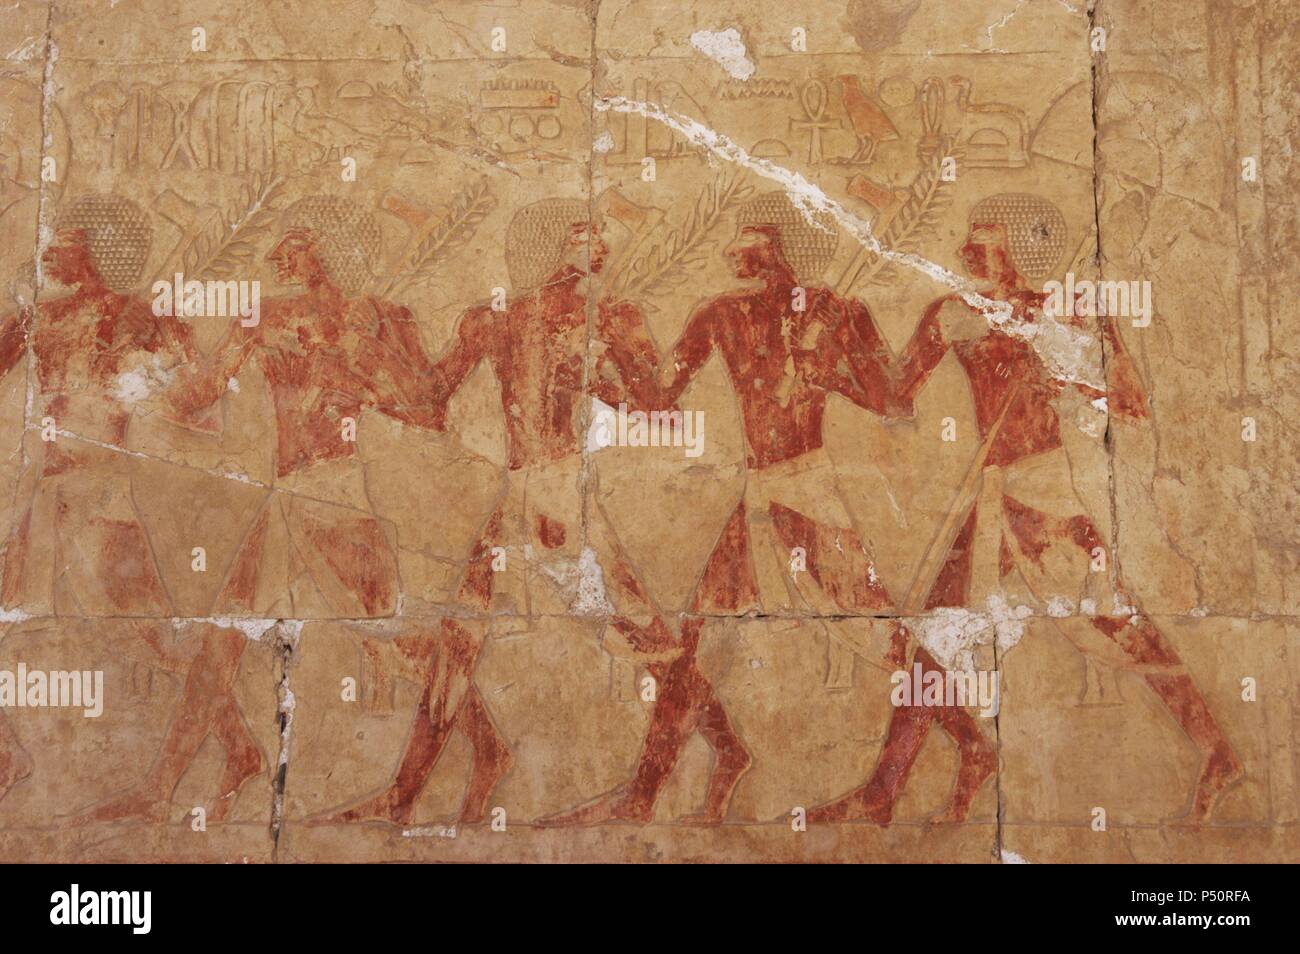 Egyptian soldiers in the expedition to the Land of Punt. Temple of Hatshepsut.  C. 1490 b.C.18th Dynasty. New Kingdom.  Deir el-Bahari. Egypt. (PR). Stock Photo